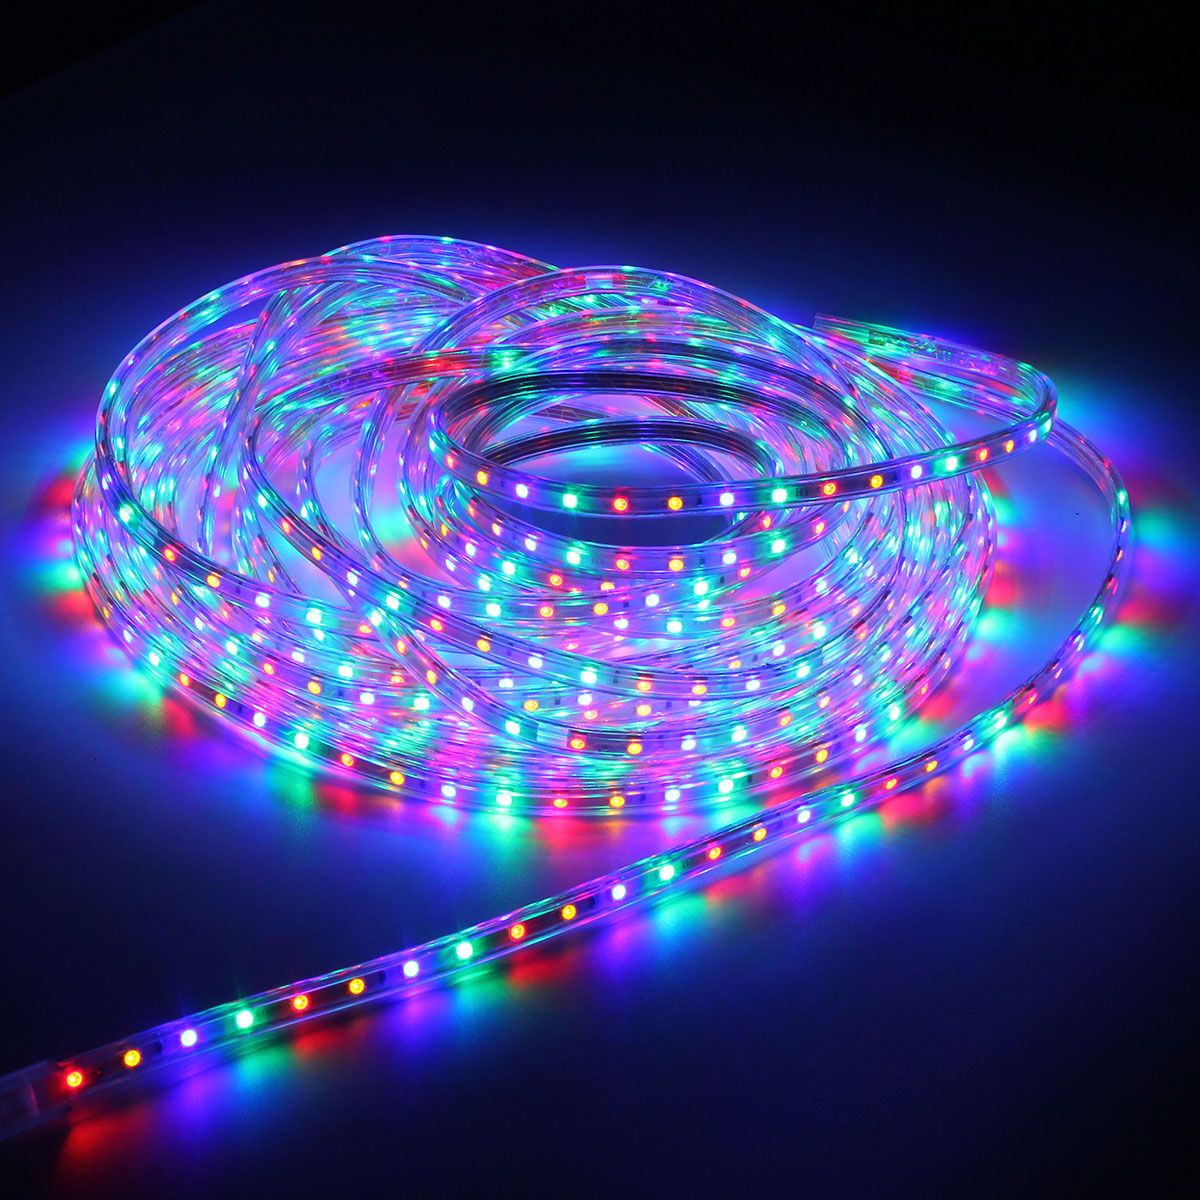 20M-5050-LED-SMD-Outdoor-Waterproof-Flexible-Tape-Rope-Strip-Light-Xmas-220V-1080114